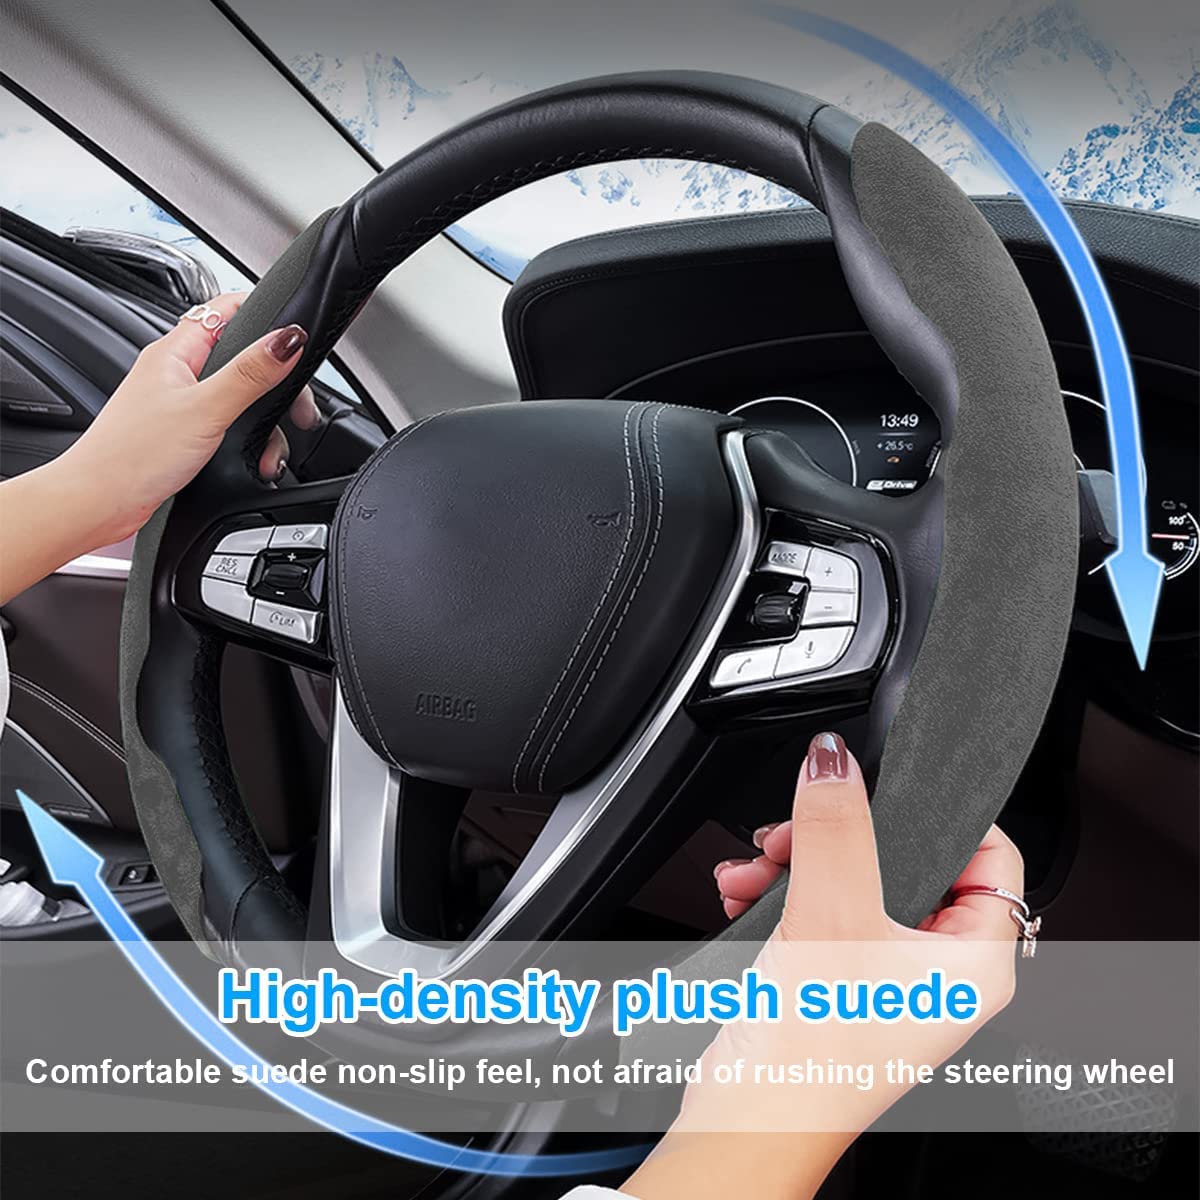 Synthetic Suede Steering Wheel Cover for Women Men, Sporty Segmented Steering Wheel Protector Anti Skid Soft Leather Universal for 99% Car Steering Wheel (Grey)